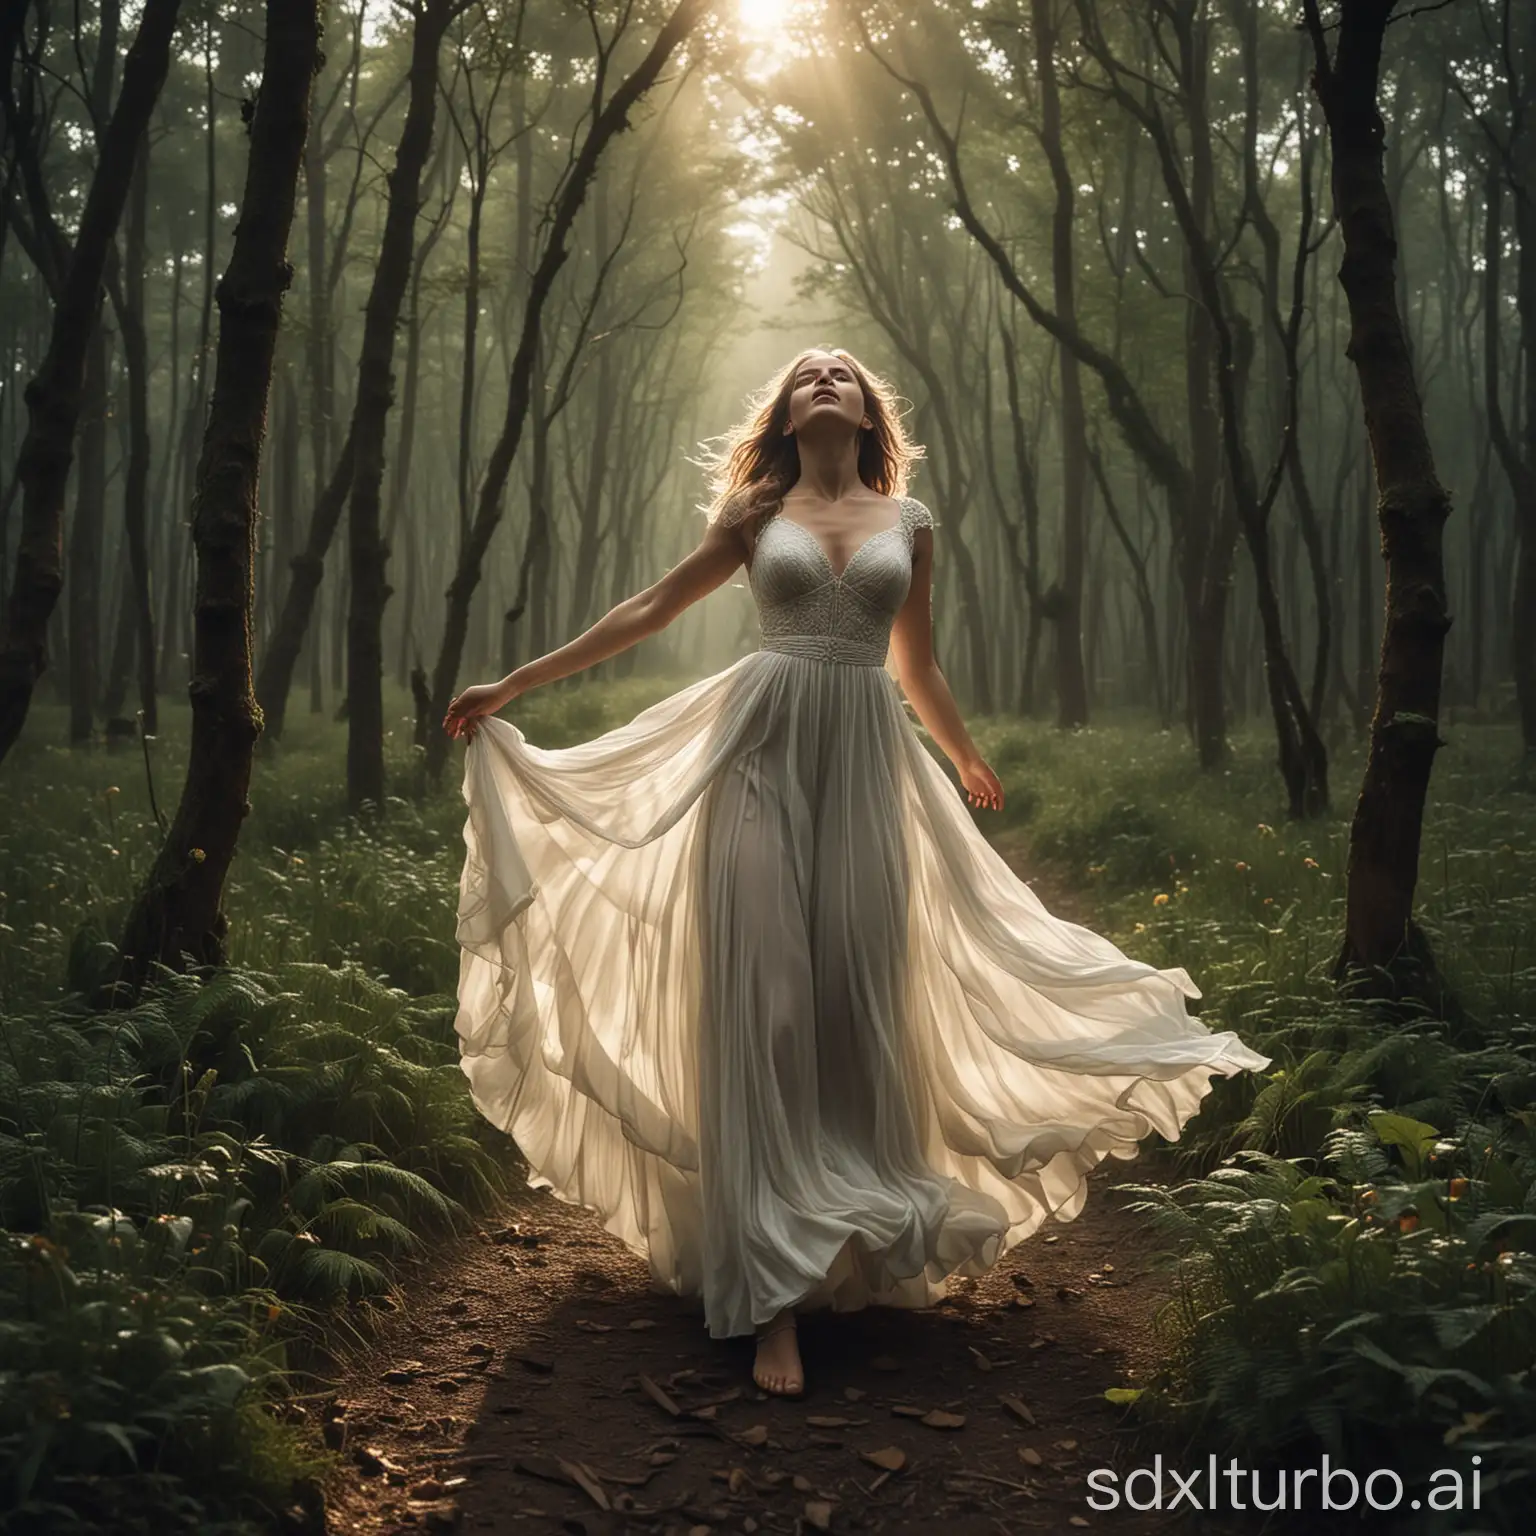 Ethereal-Dance-Singing-with-Joy-in-the-Forbidden-Forest